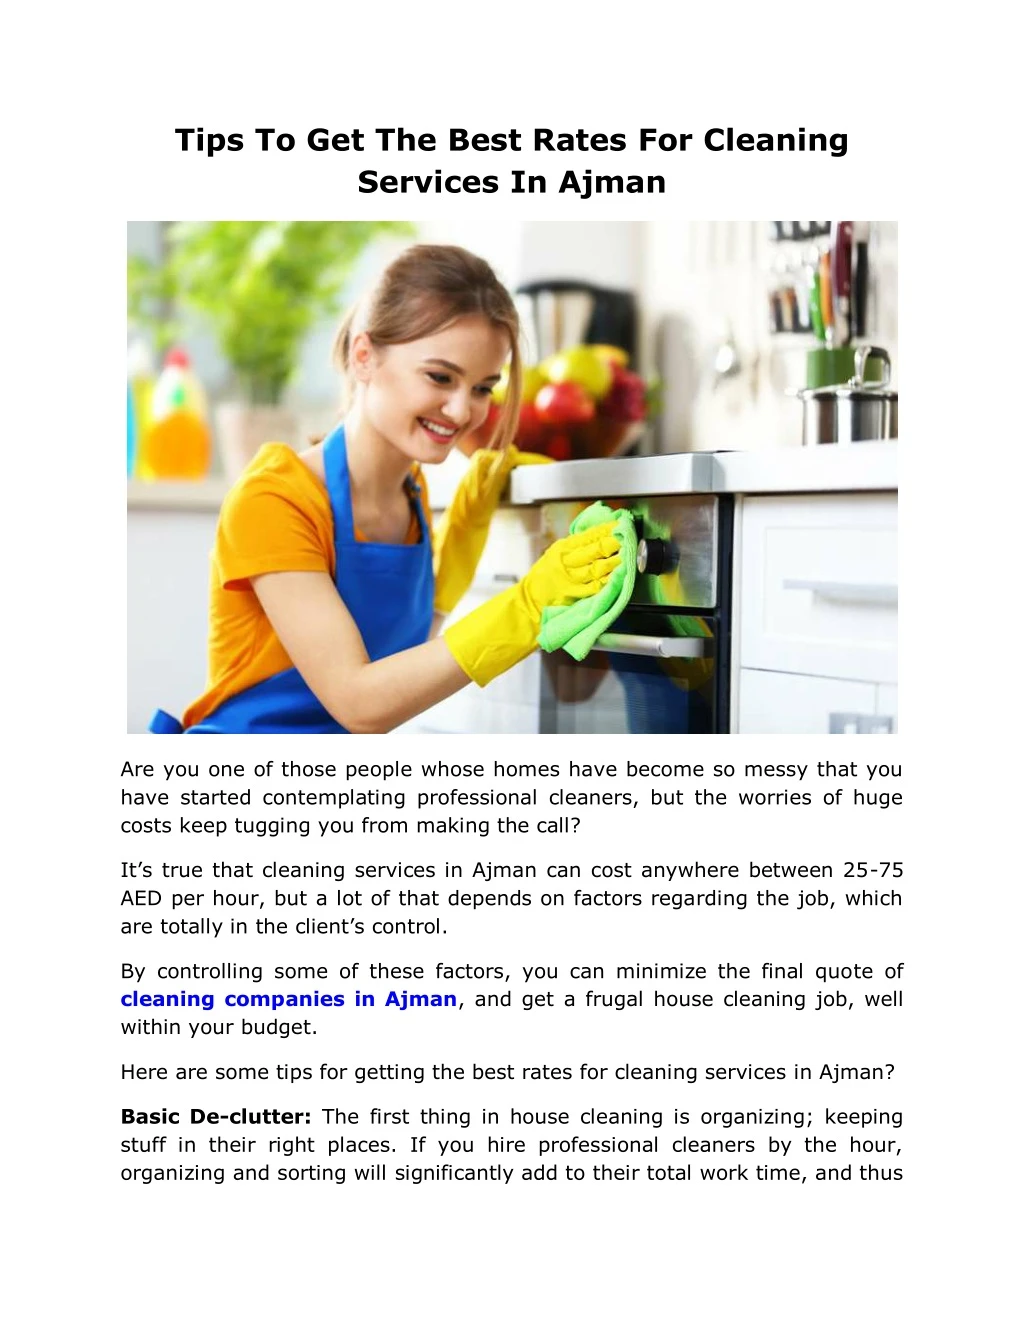 tips to get the best rates for cleaning services